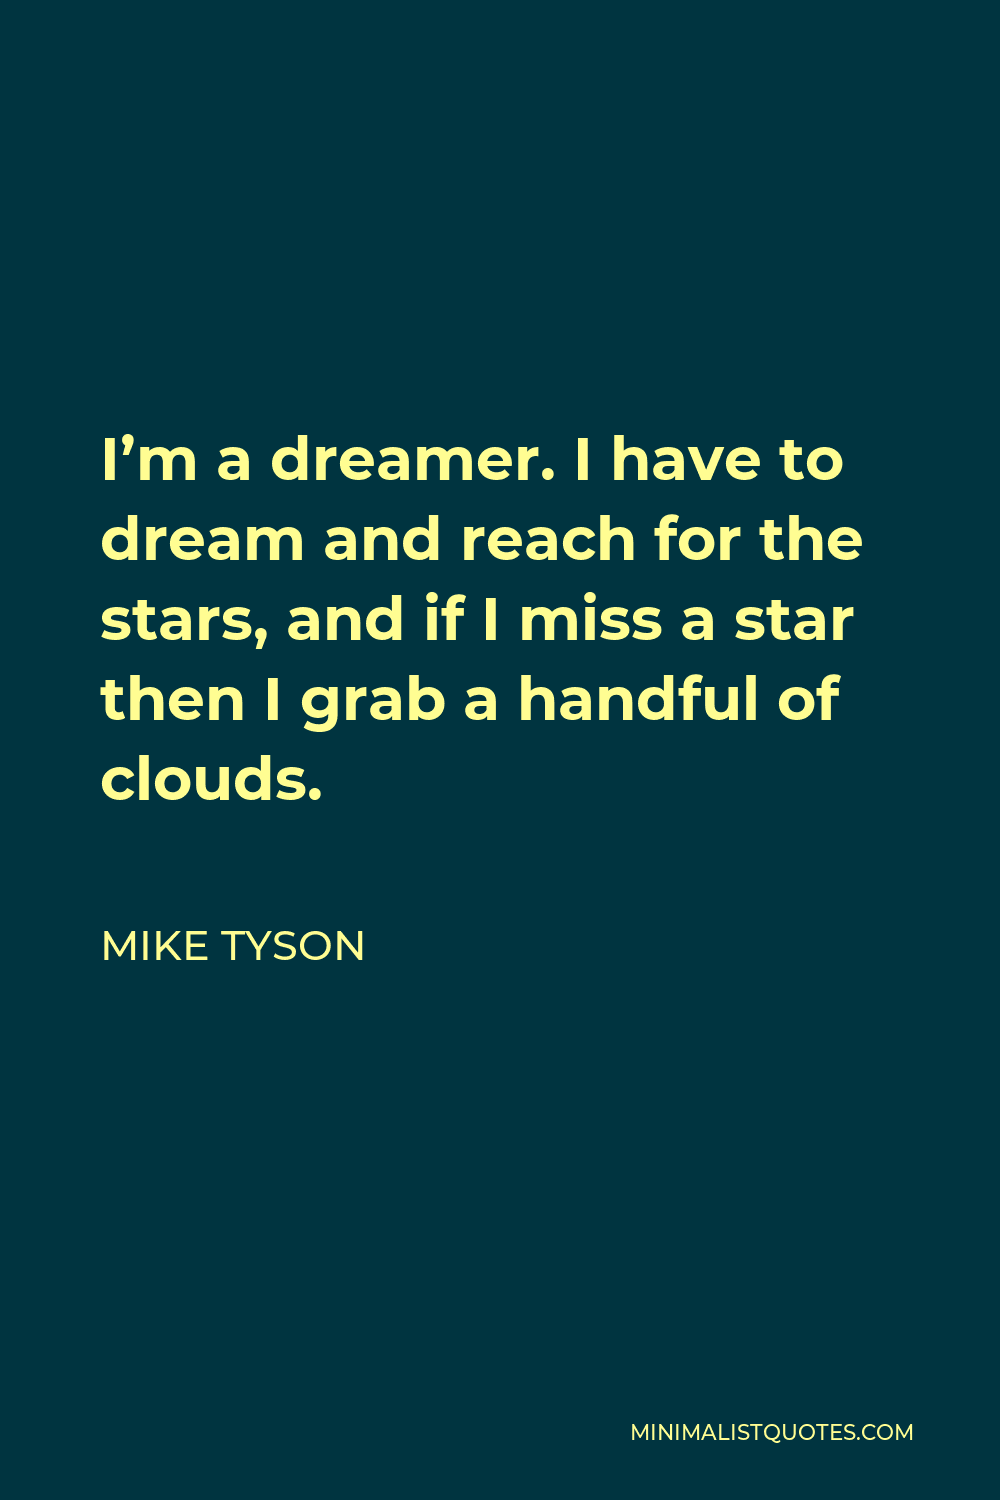 Mike Tyson Quote - I’m a dreamer. I have to dream and reach for the stars, and if I miss a star then I grab a handful of clouds.